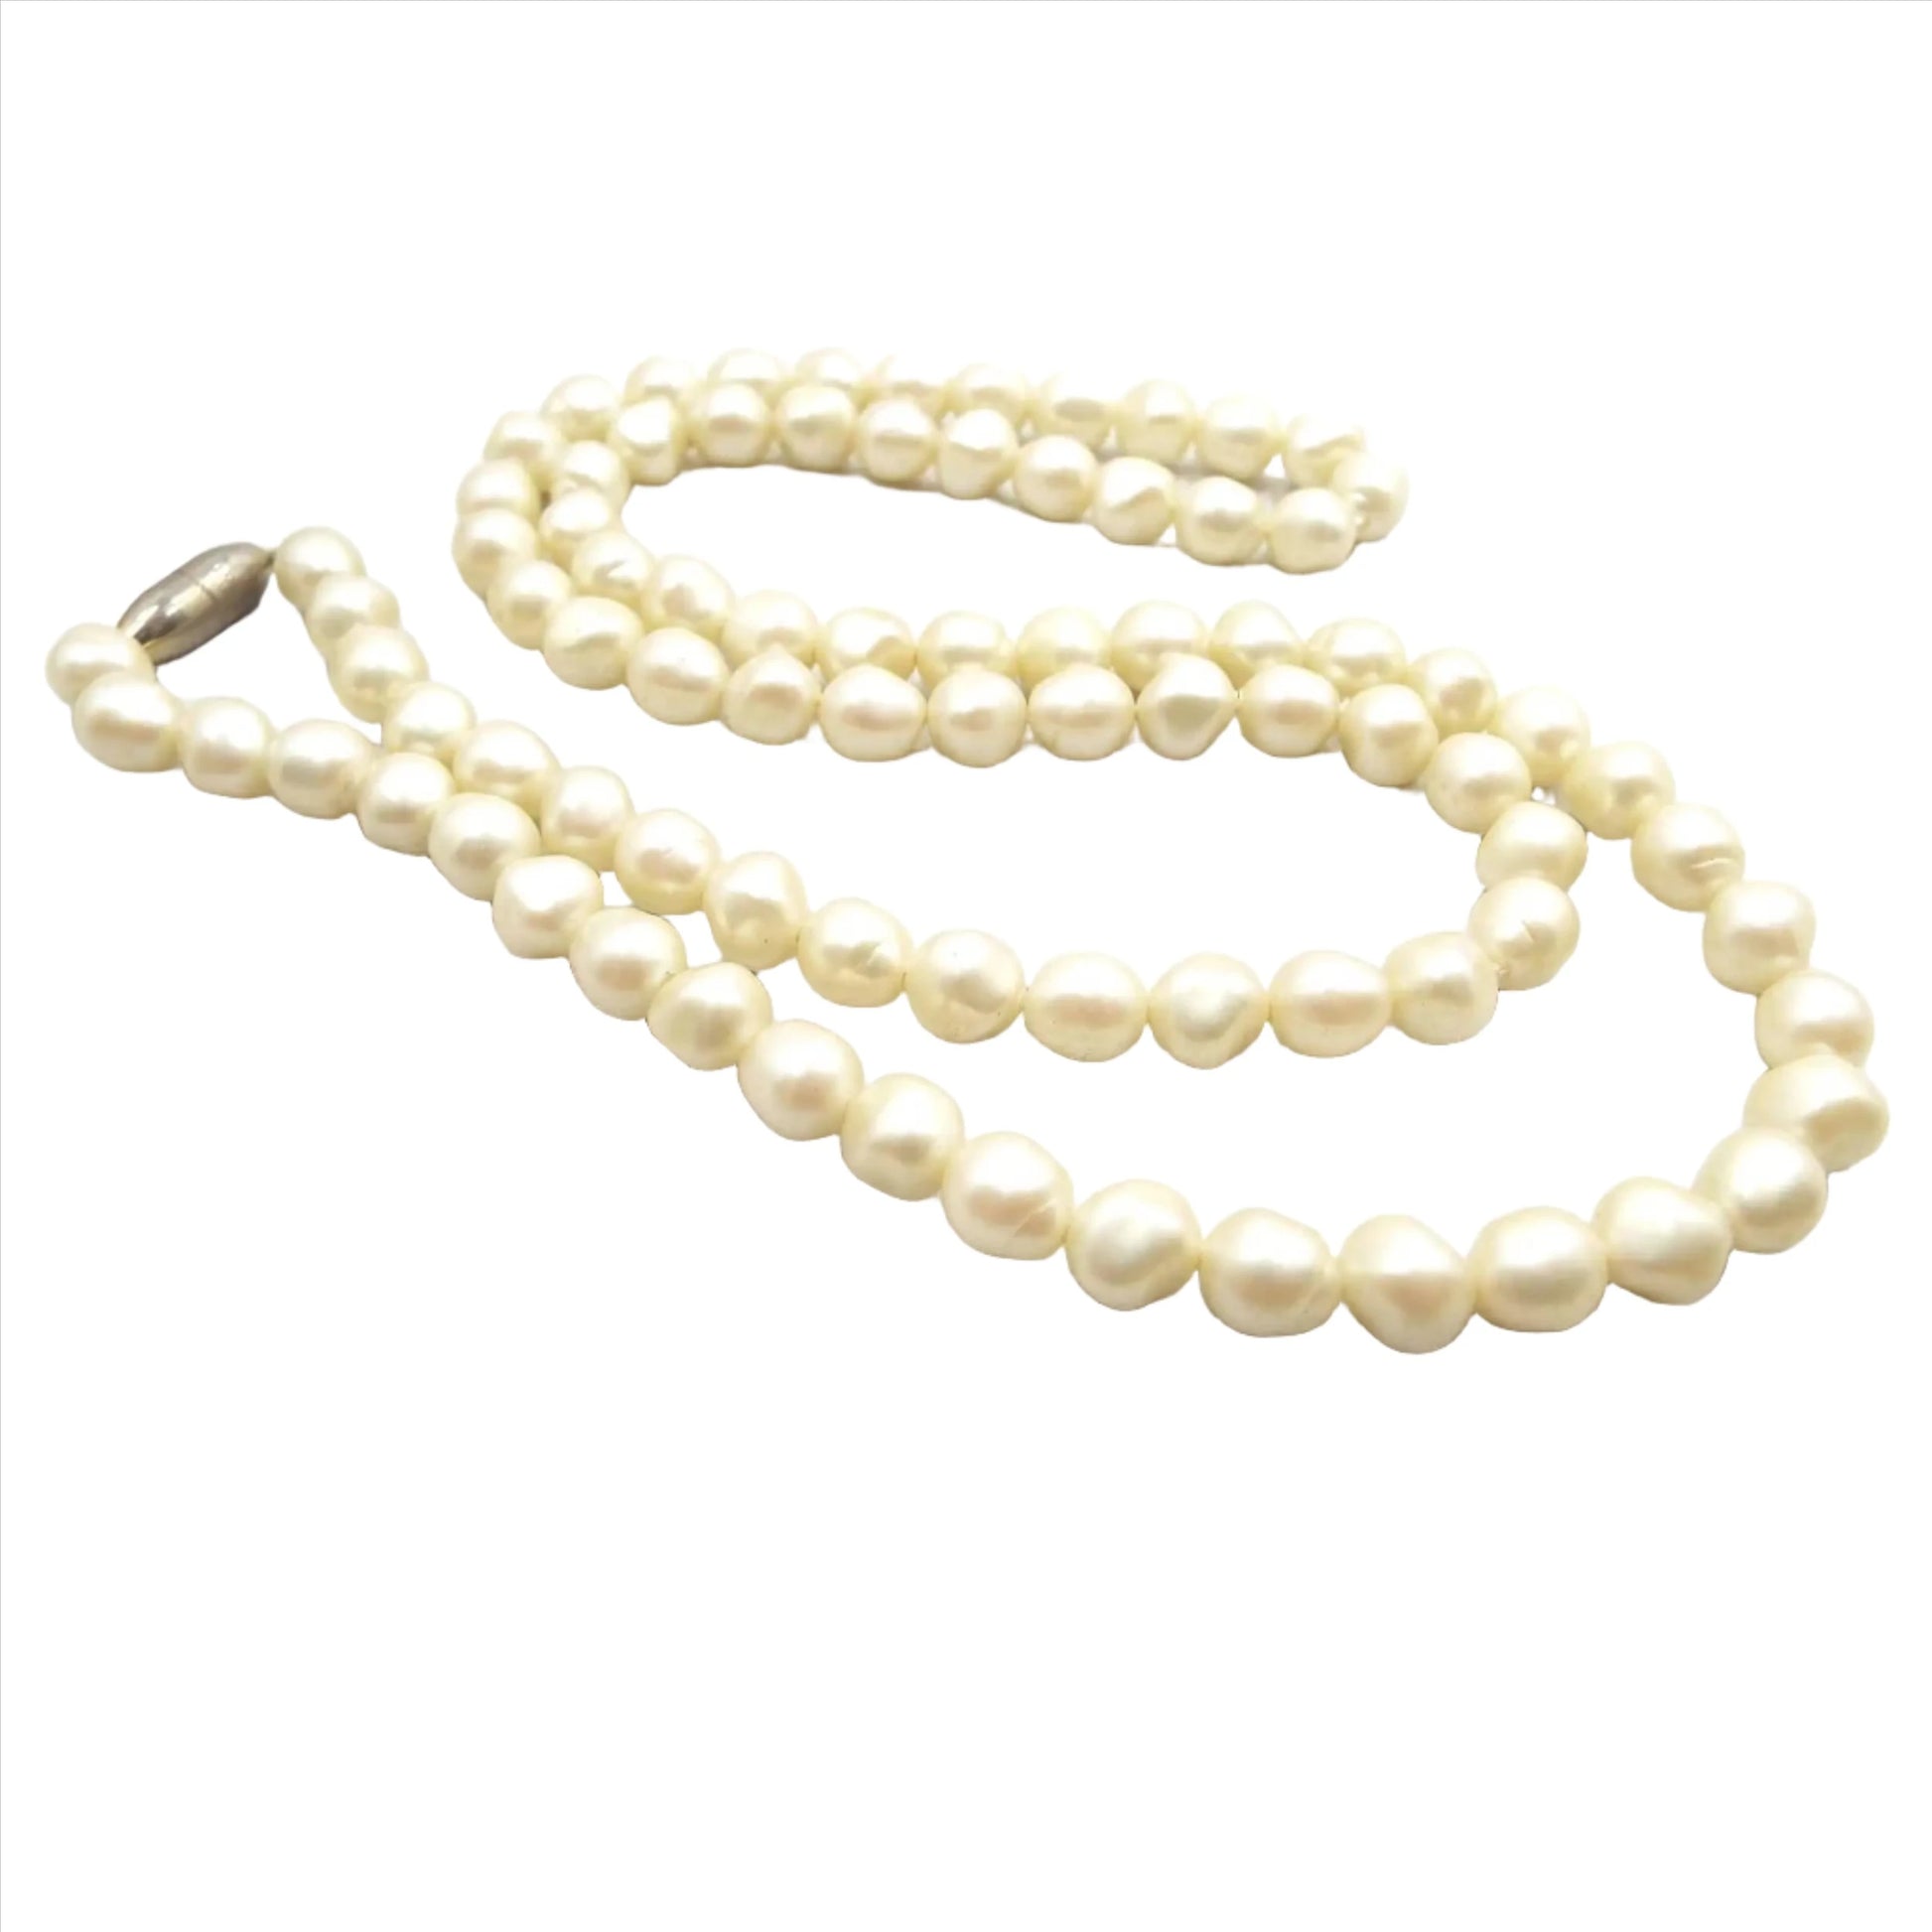 Angled view of the retro vintage baroque shaped faux pearl beaded necklace. The beads are off white in color. There is a screw barrel clasp at the end.